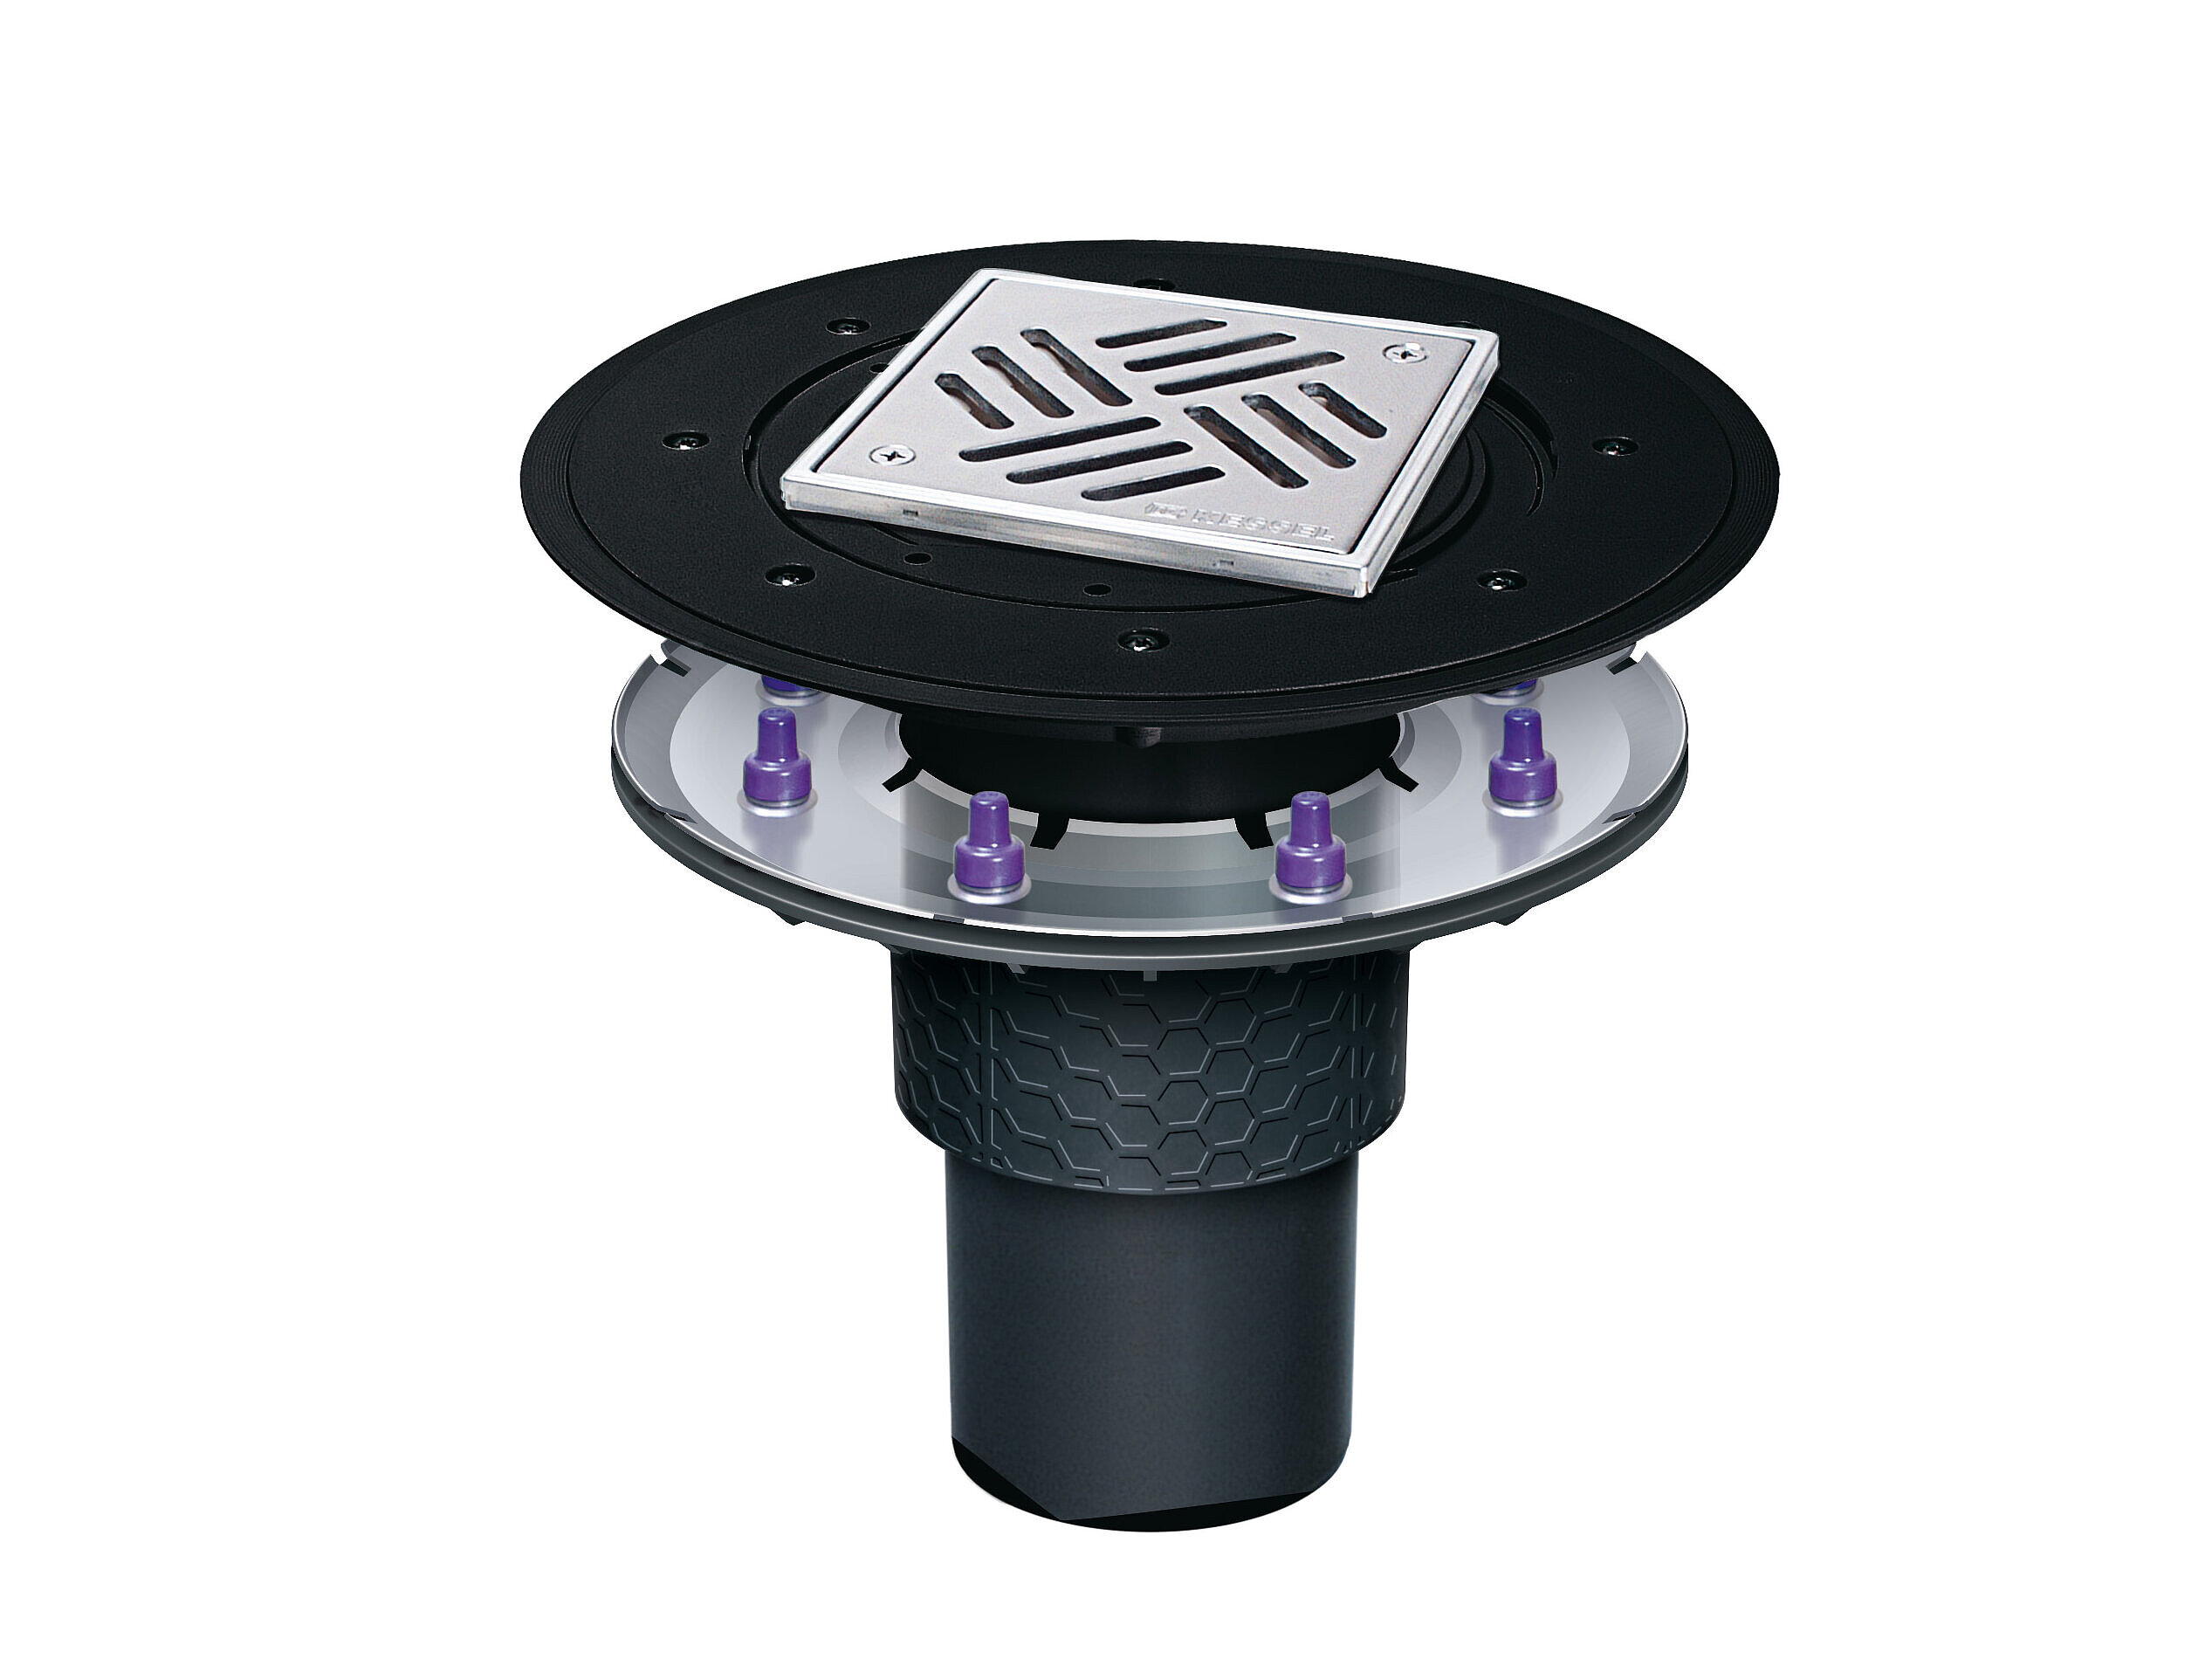 Ecoguss drain body with a vertical drain with a pressure sealing flange and a Kessel design cover with Lock & Lift